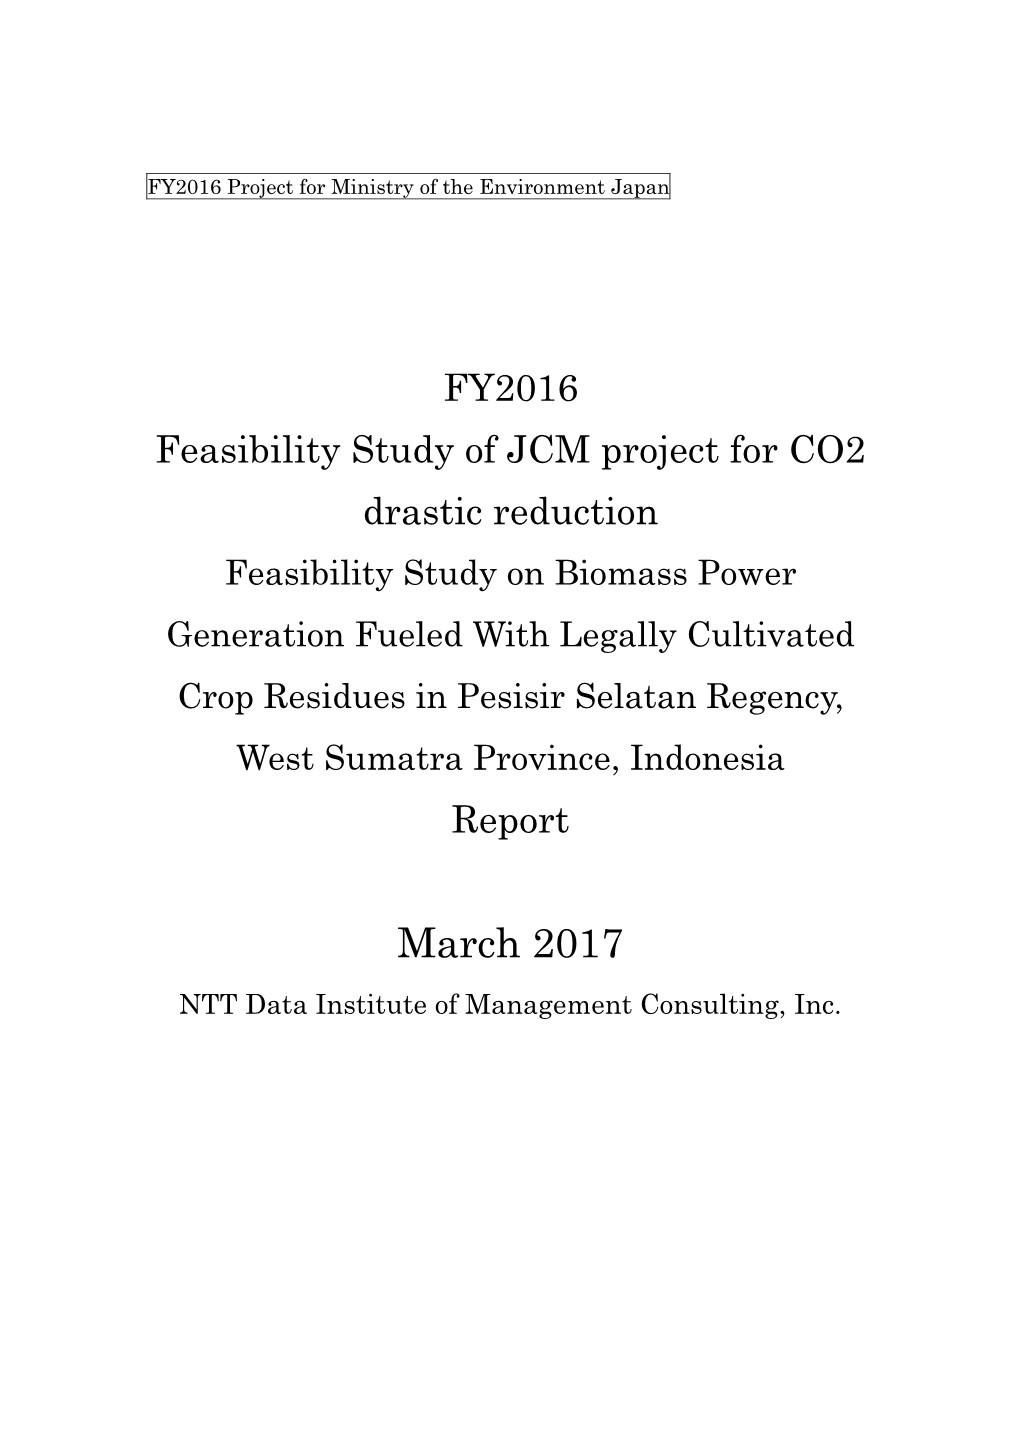 FY2016 Feasibility Study of JCM Project for CO2 Drastic Reduction